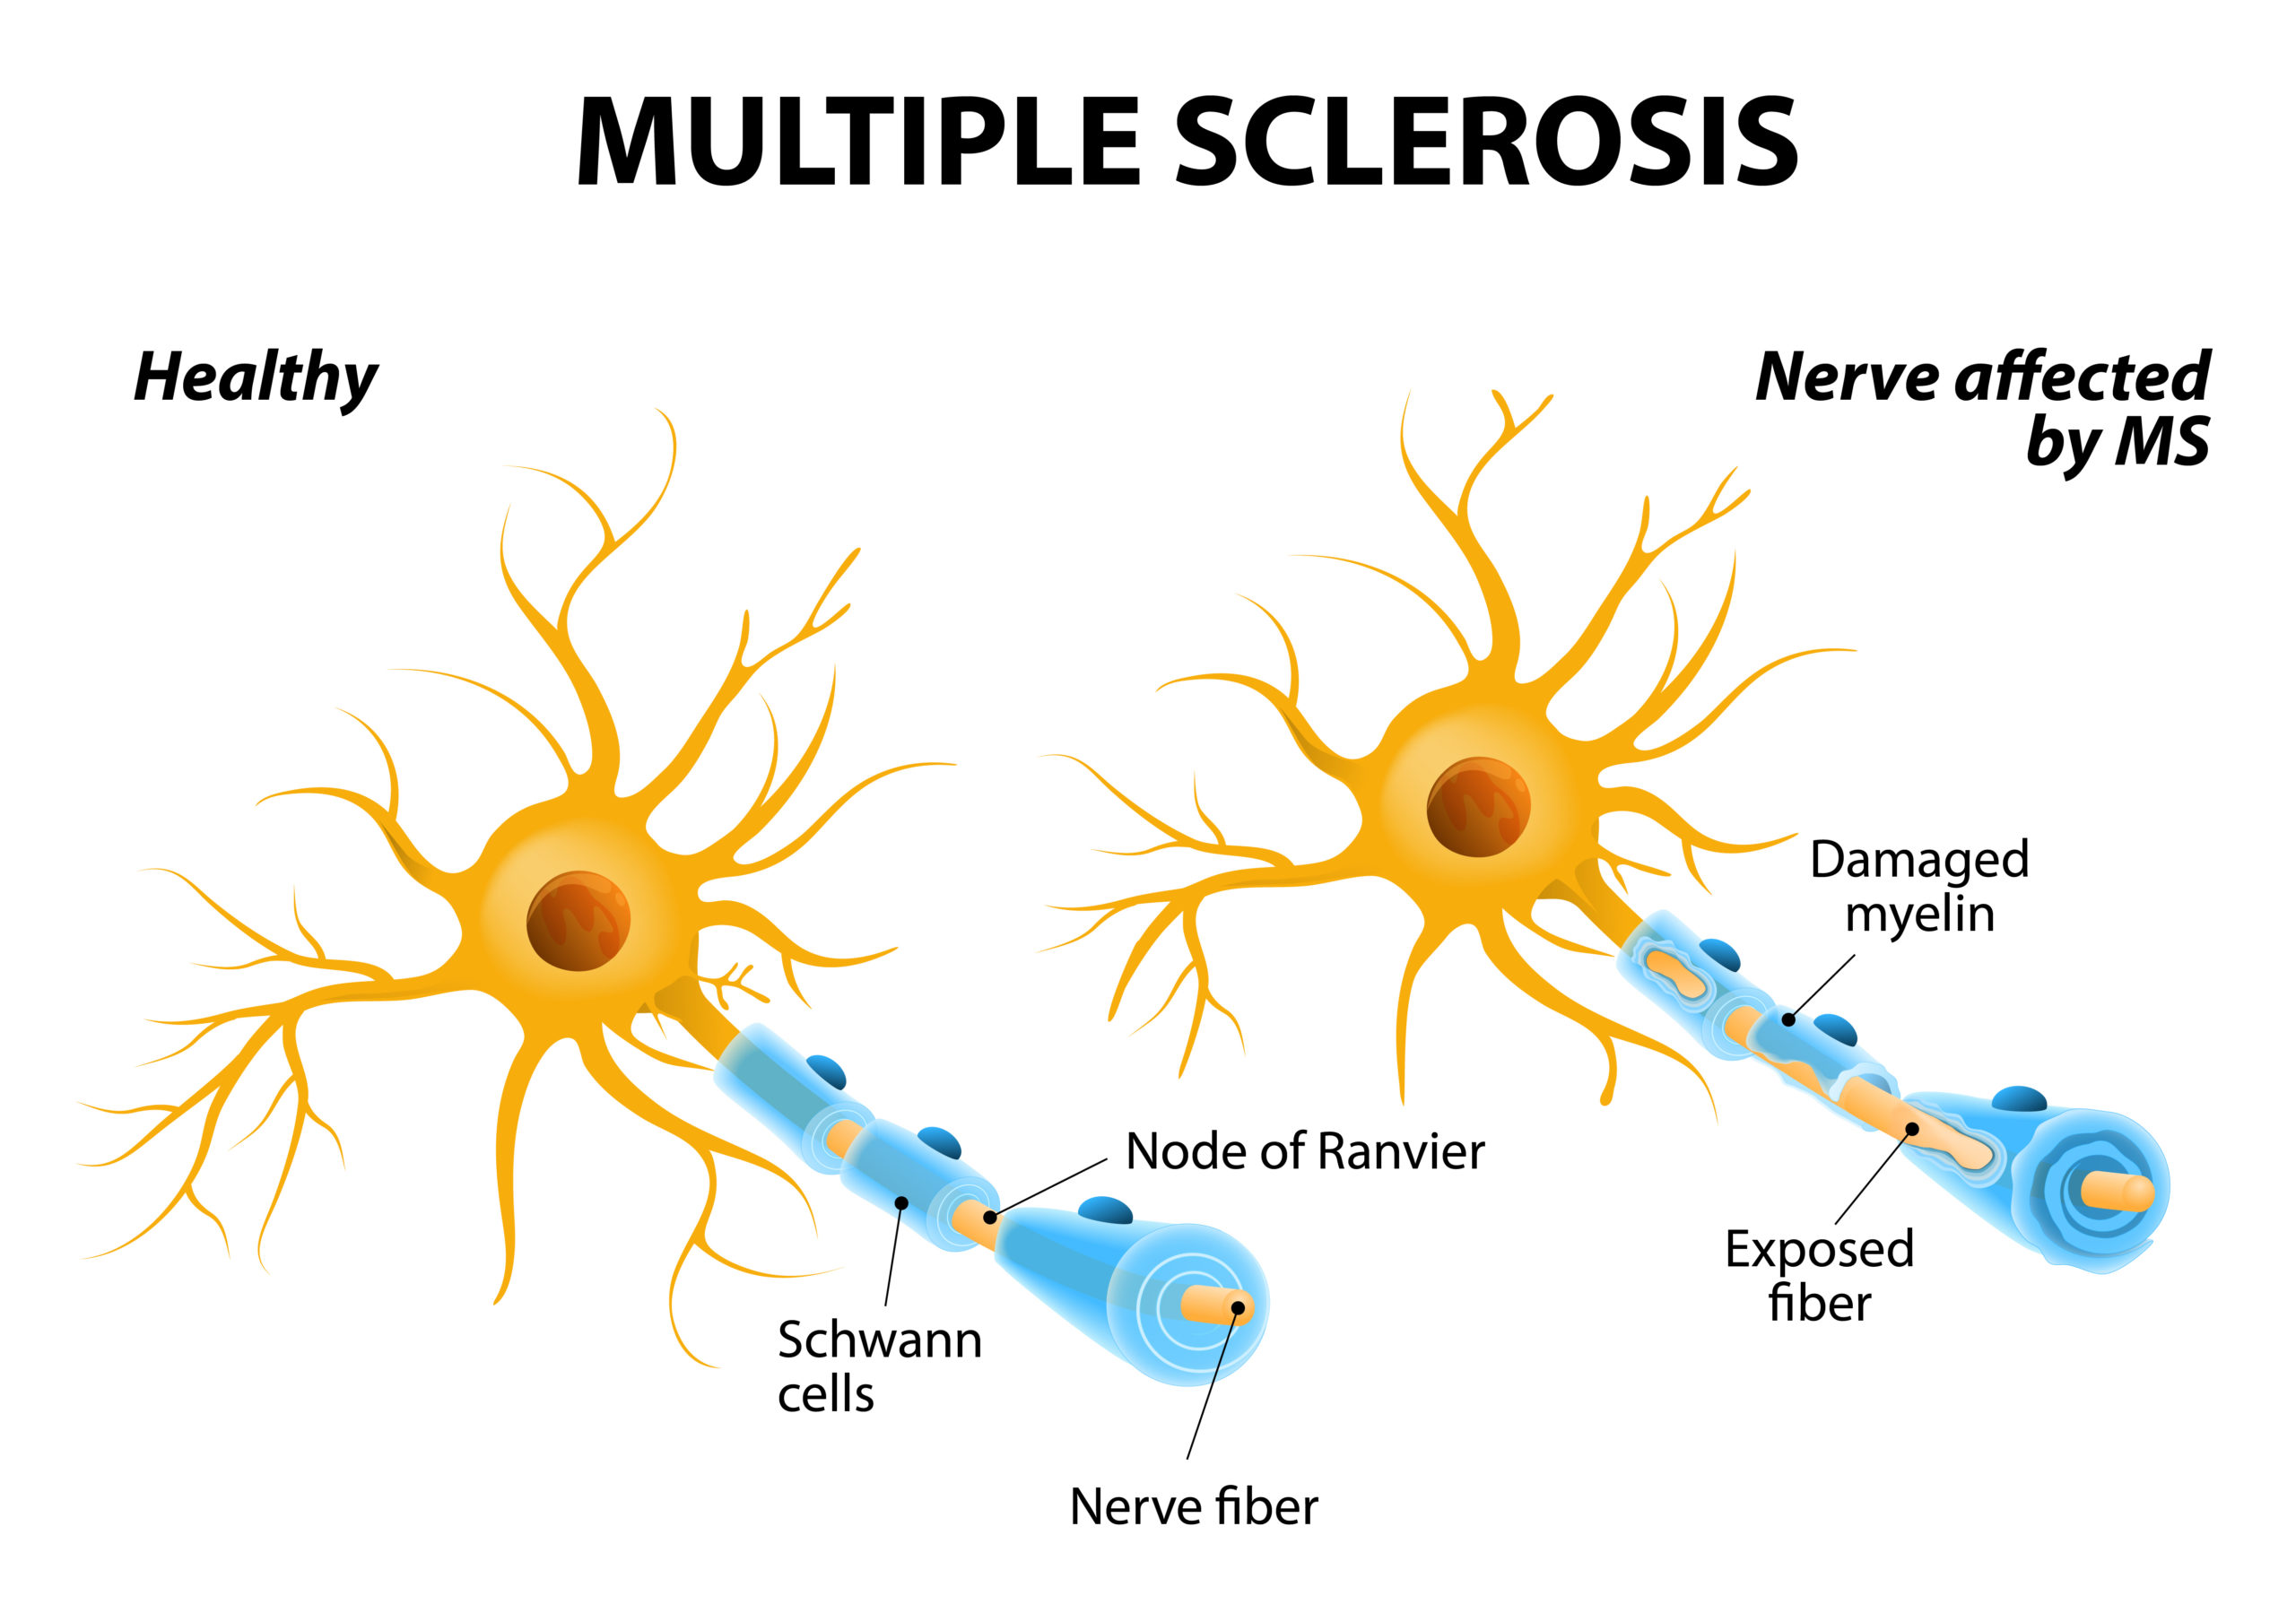 Multiple Sclerosis Symptoms Causes And Treatment